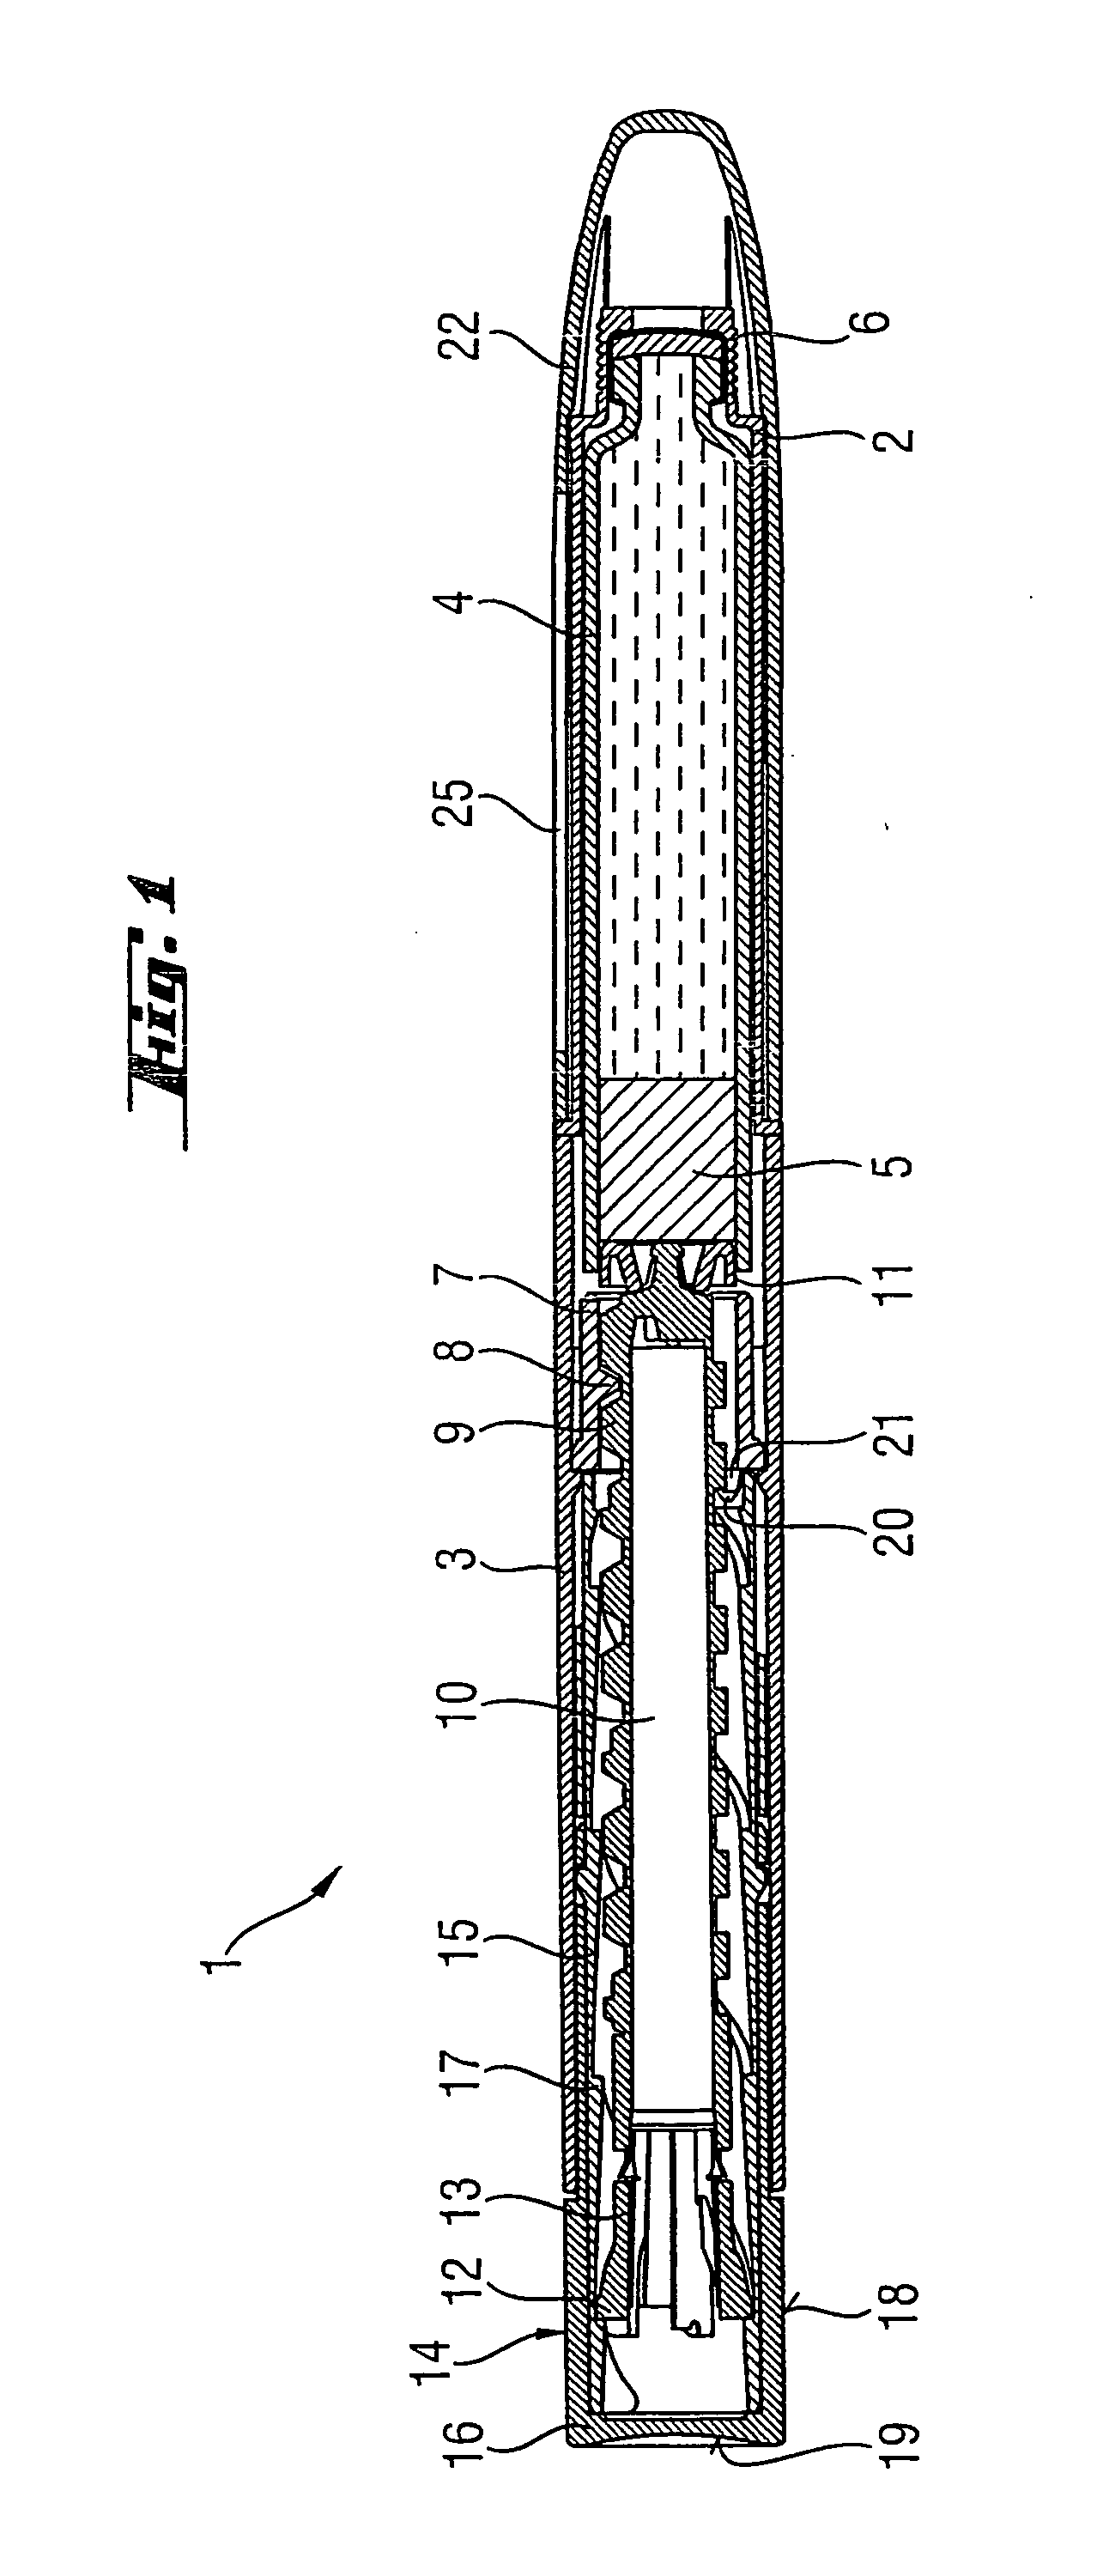 Dosing and Drive Mechanism for Drug Delivery Device